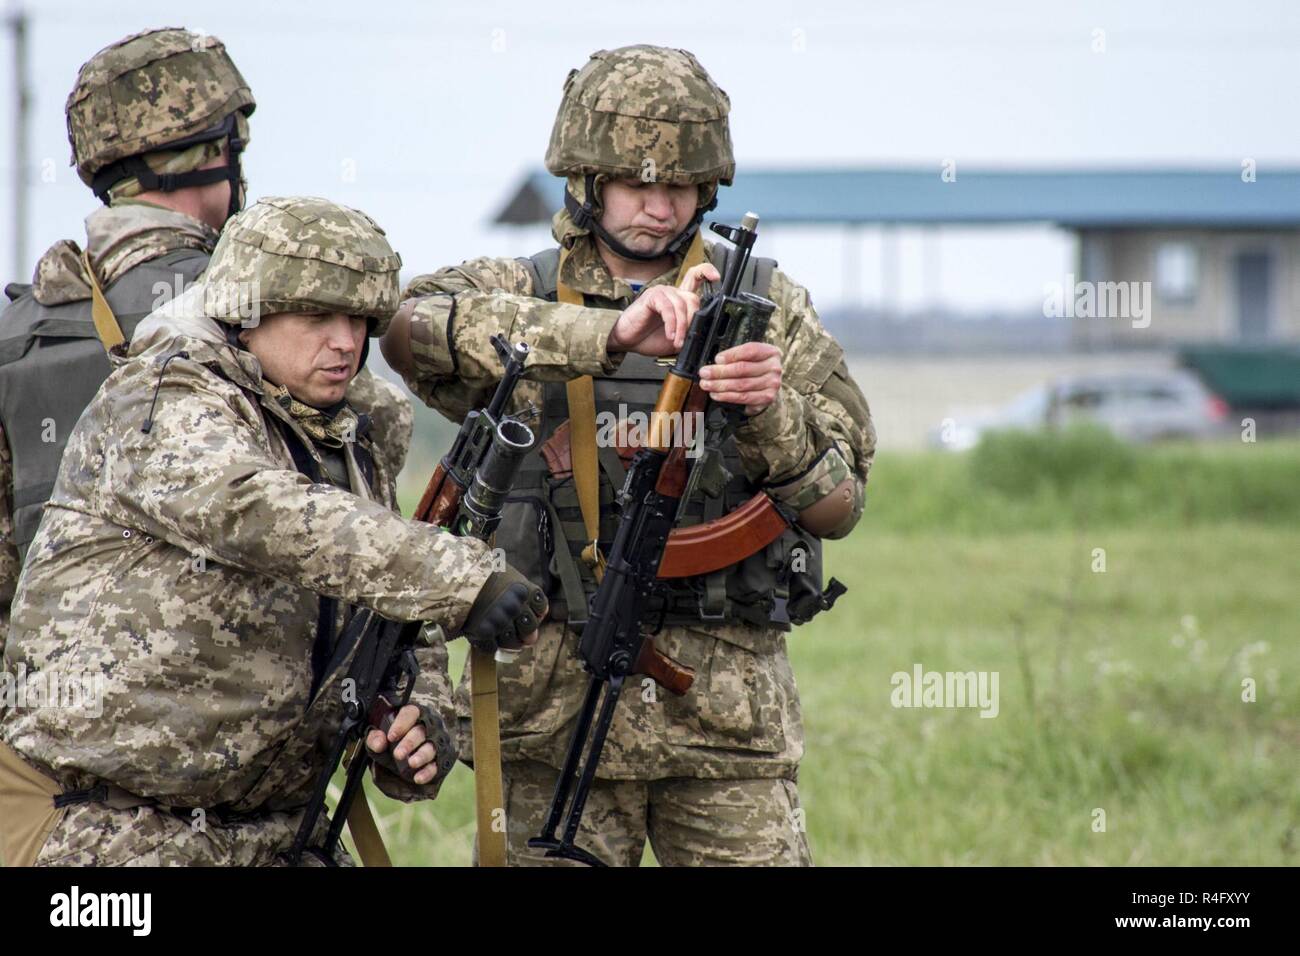 Ukrainian soldiers of the 1st Airmobile Battalion, 79th Air Assault Brigade inspect their GP-25 grenade launchers before using them during training at the Yavoriv Combat Training Center on the International Peacekeeping and Security Center, near Yavoriv, Ukraine, on May 3.    CTC trainers, partnered with Soldiers of the U.S. Army's 45th Infantry Brigade Combat Team, are teaching troops of the Ukrainian army's 1st Airmobile Battalion, 79th Air Assault Brigade how to employ the grenade launchers during defensive operations during the battalion's rotation at the CTC. The 45th IBCT is deployed as  Stock Photo